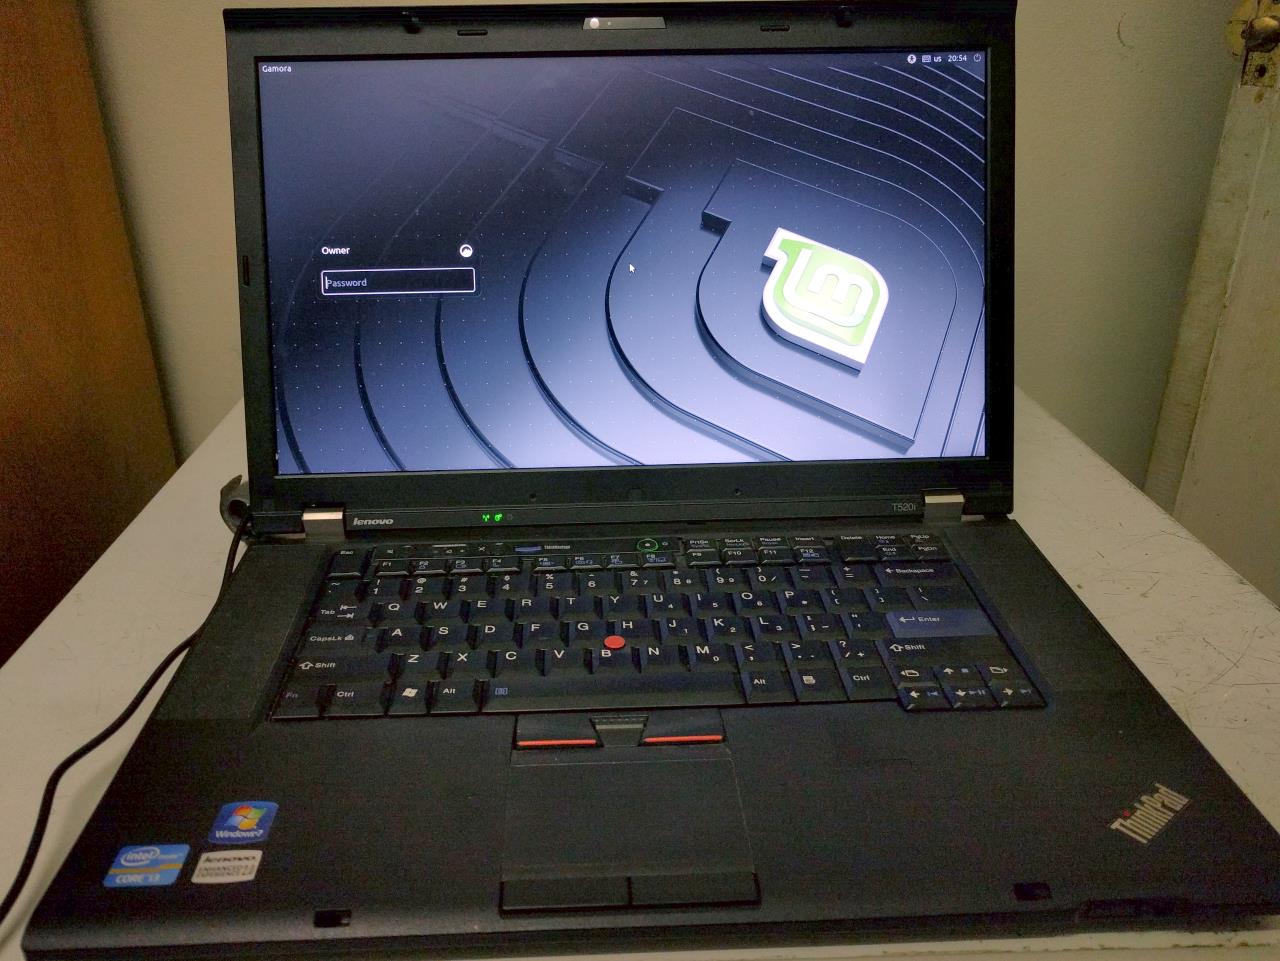 A shiny old laptop running Linux Mint